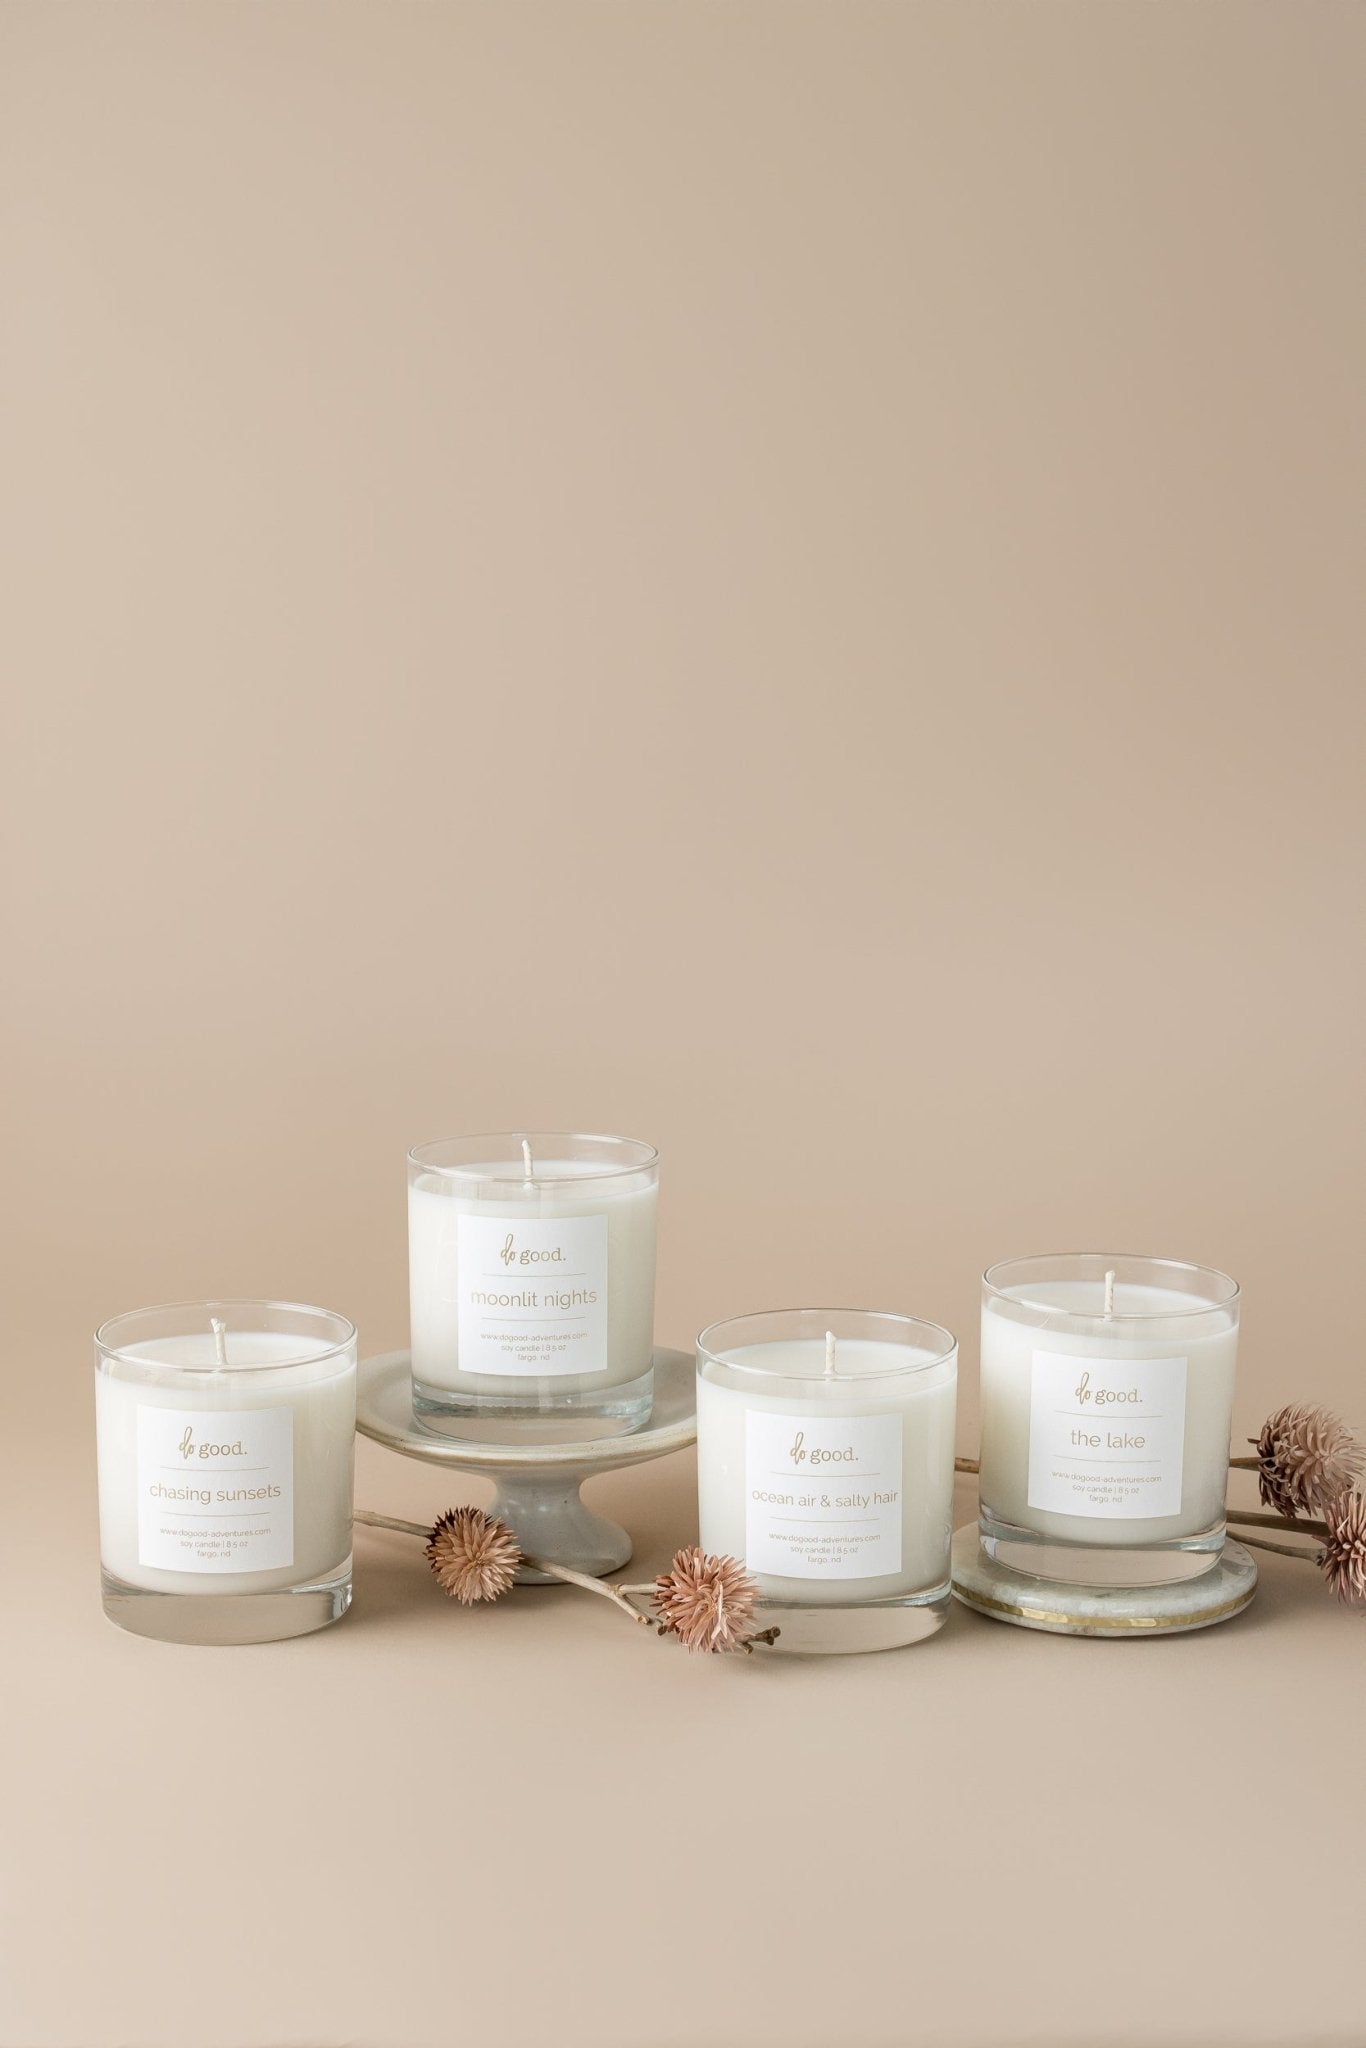 image of four soy candle in the summer collection:  chasing sunsets, moonlit nights, ocean aire & salty hair the lake